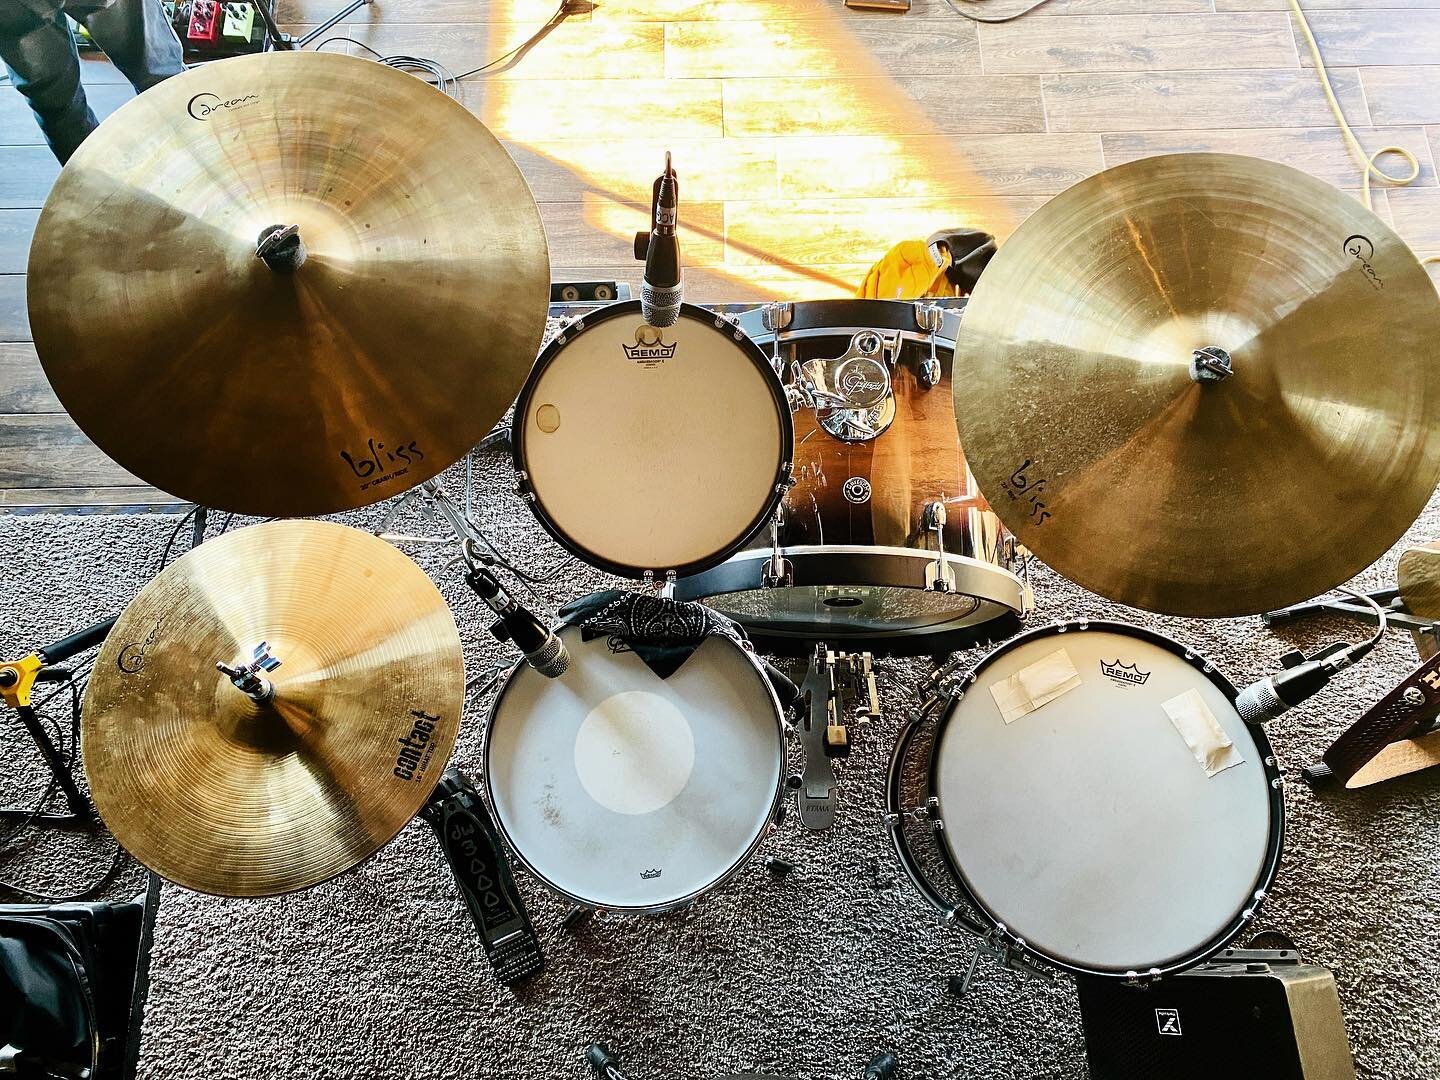 The simplified set up&hellip;
.
.
.
#drums #cymbals #dreamcymbals